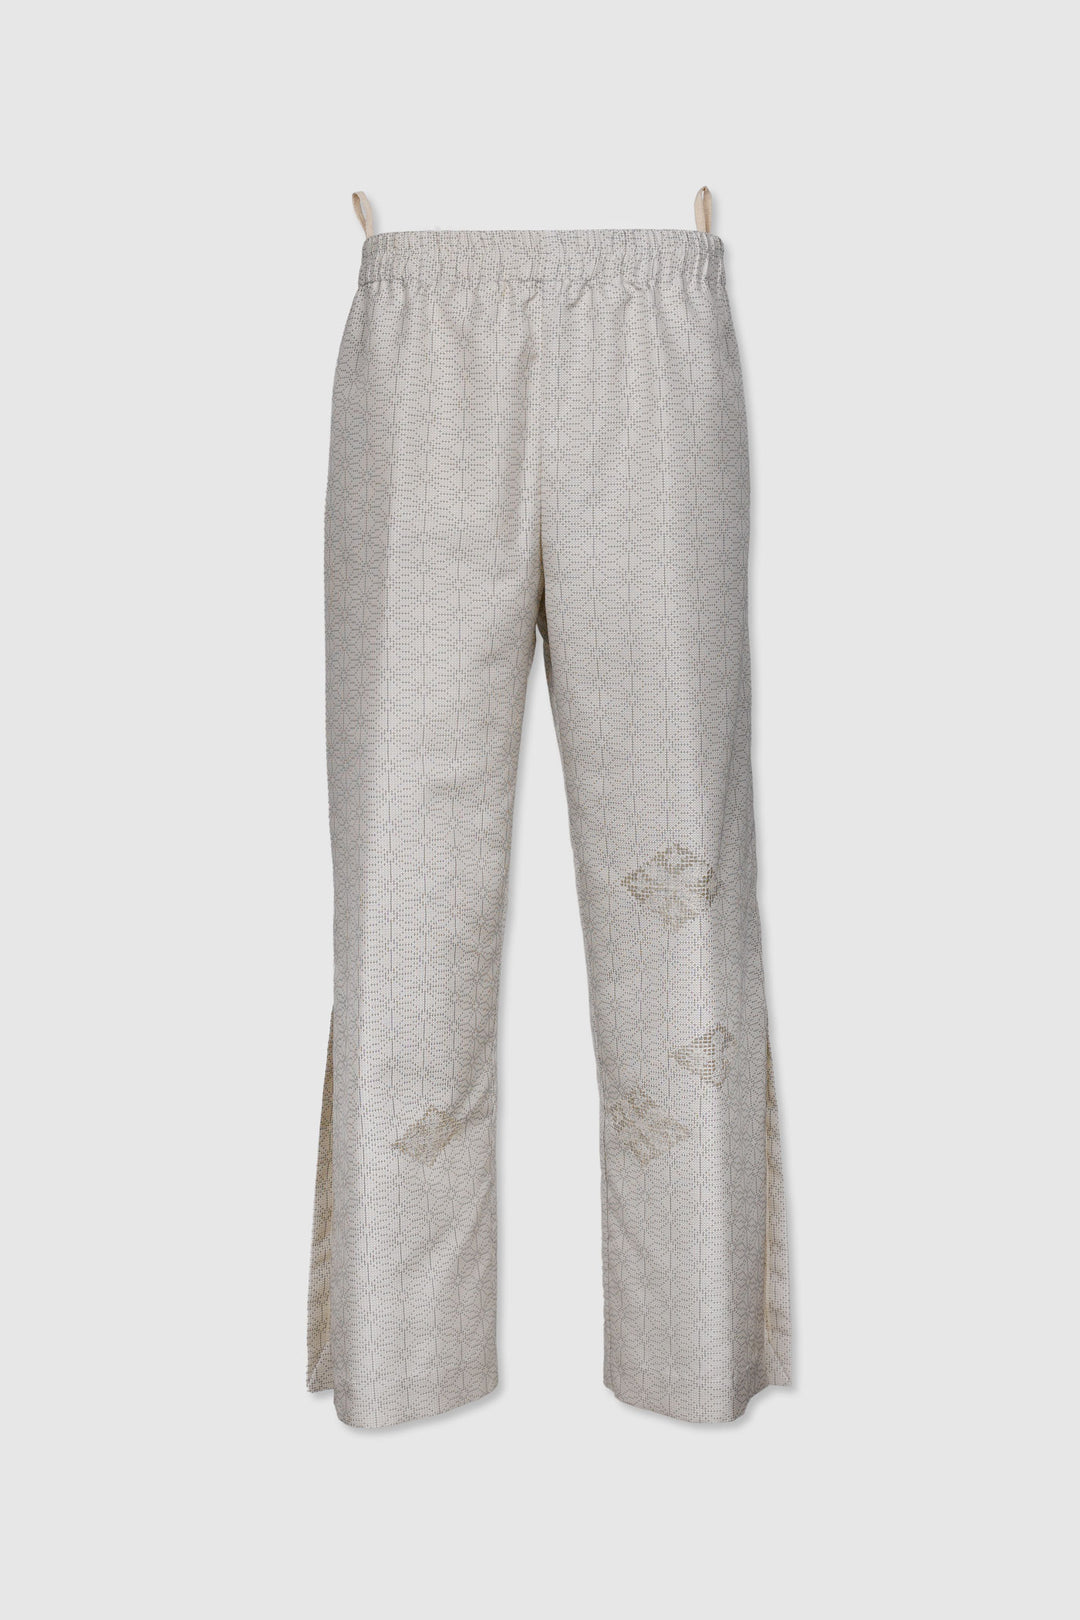 Straight-Cut Silk Pants with Subtle Geometric Design and Delicate Details